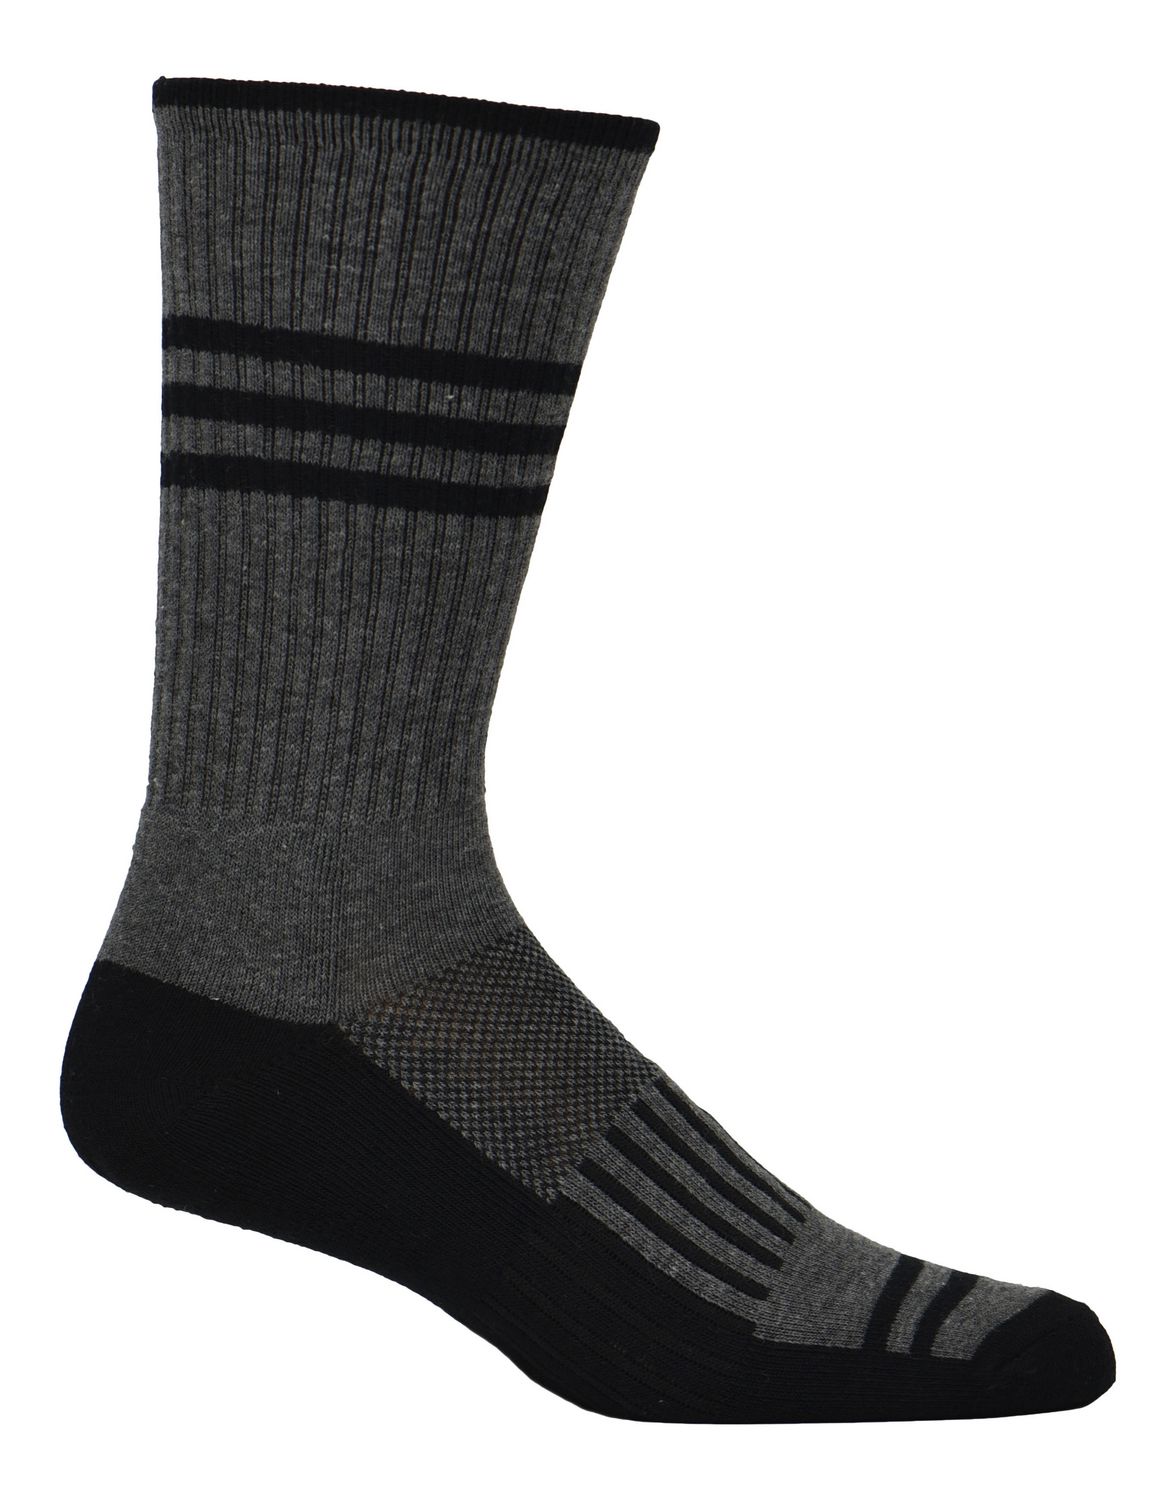 Pathfinder by Kodiak Men's 3-Pack Business And Casual Crew Socks ...